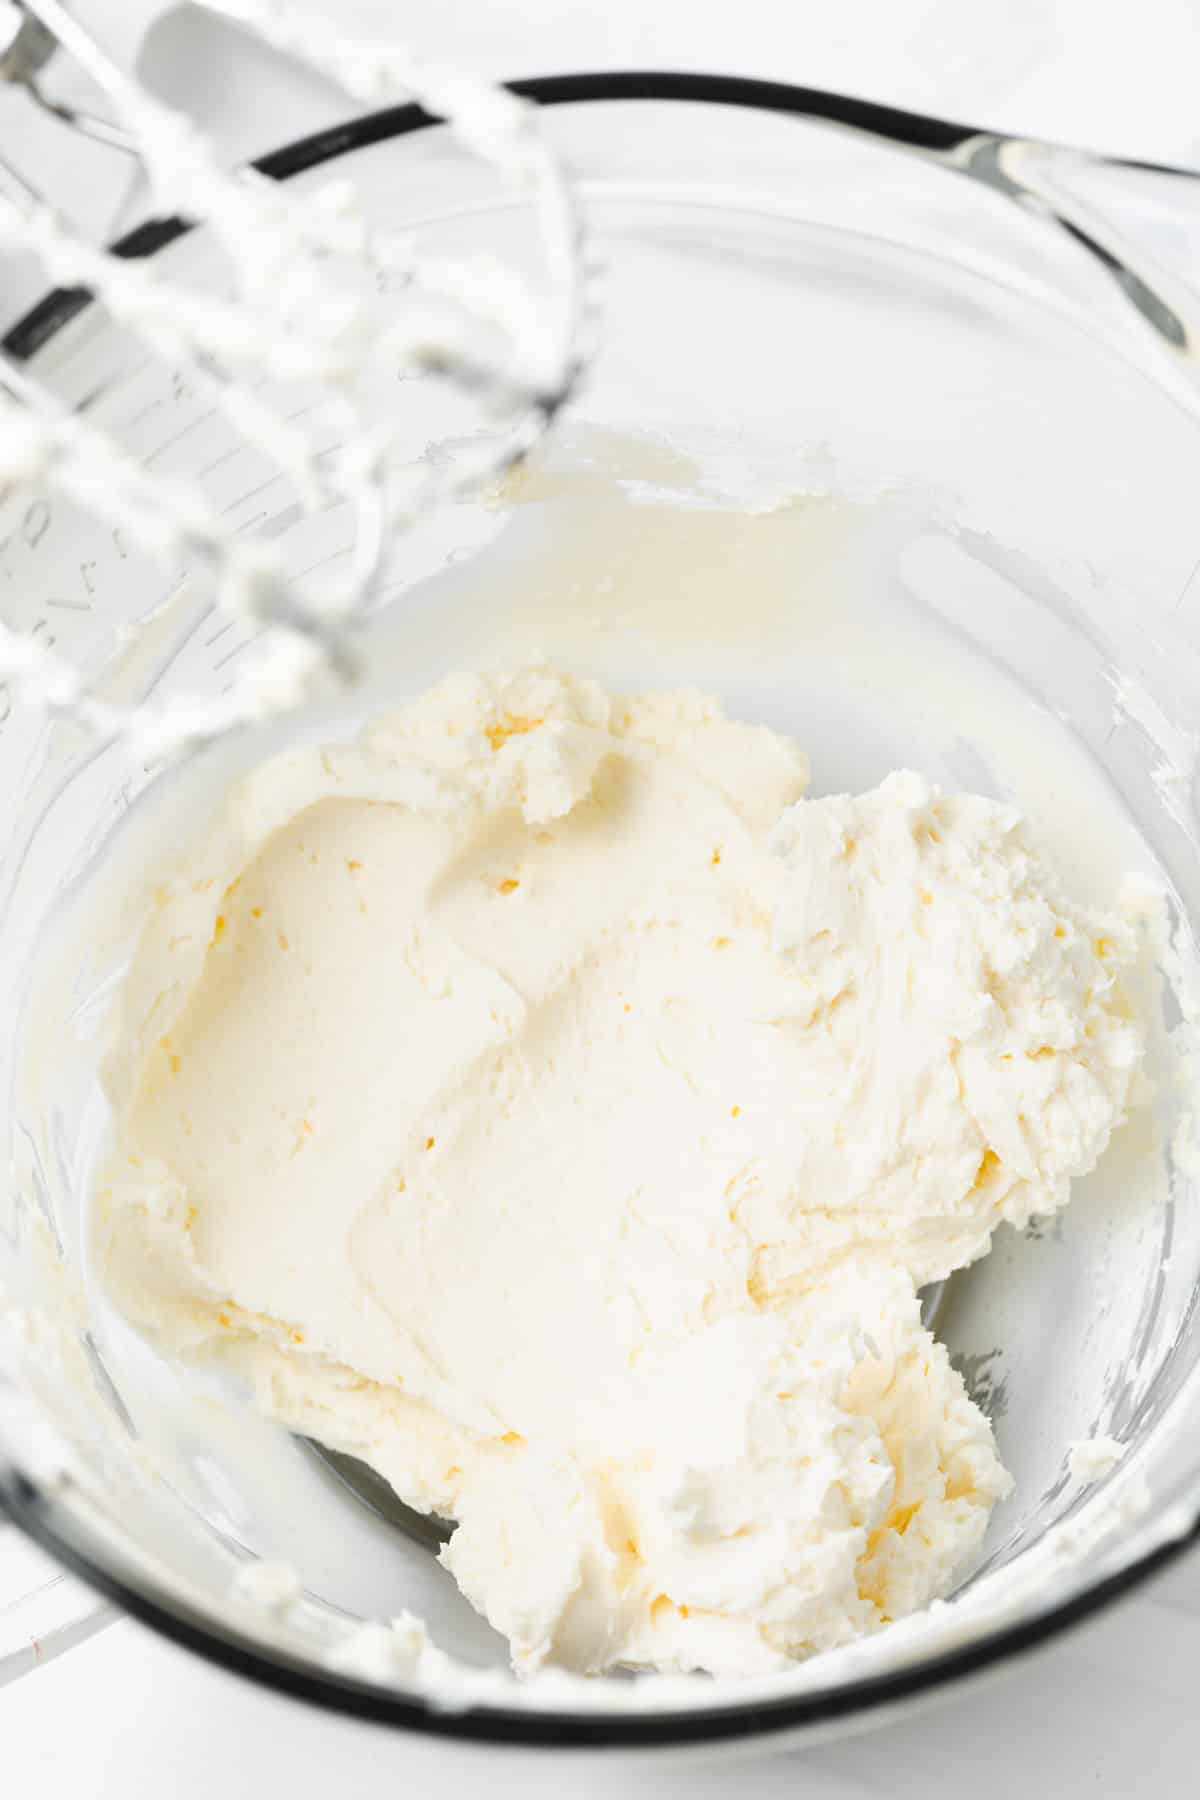 Cream cheese in mixing bowl.